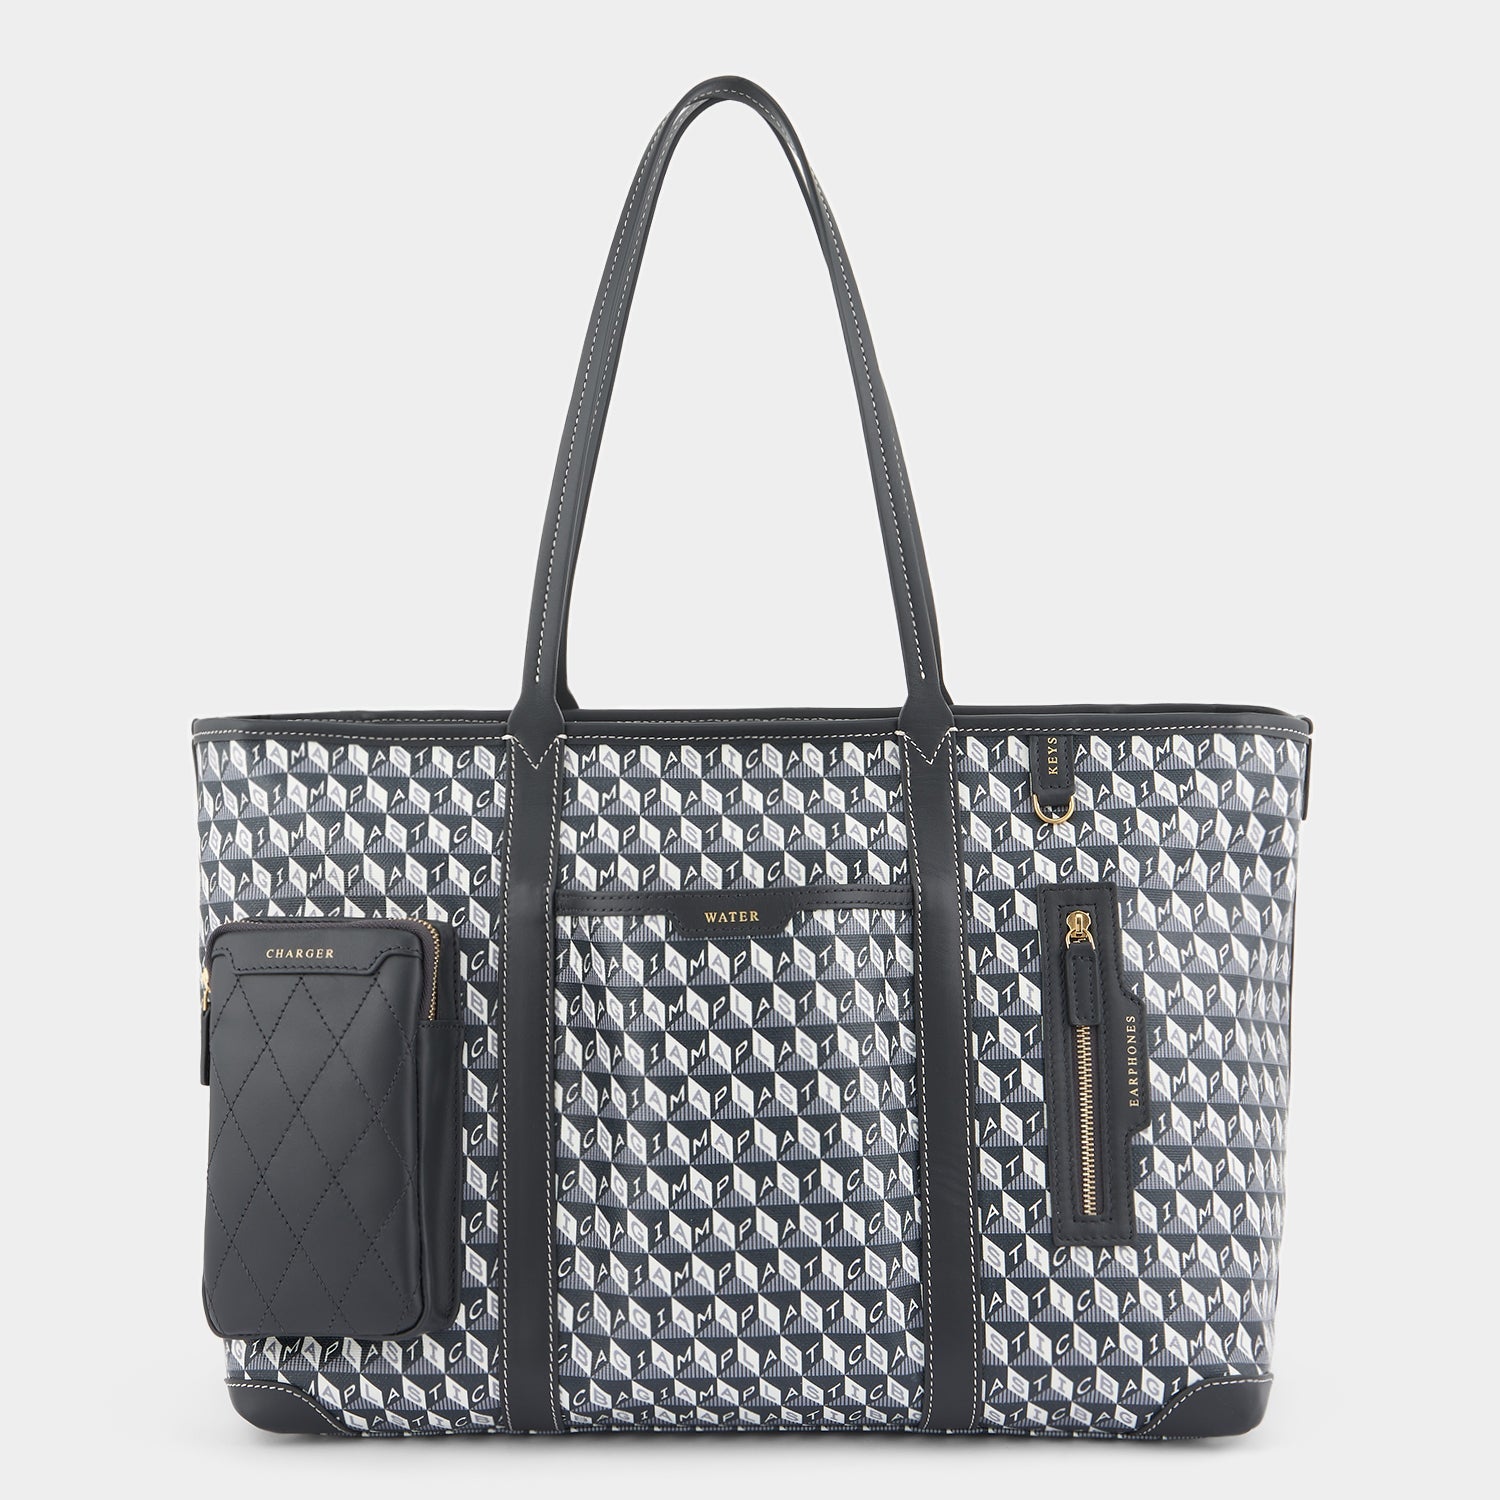 I am a Plastic Bag In-Flight Tote -

                  
                    Recycled Canvas in Charcoal -
                  

                  Anya Hindmarch US
